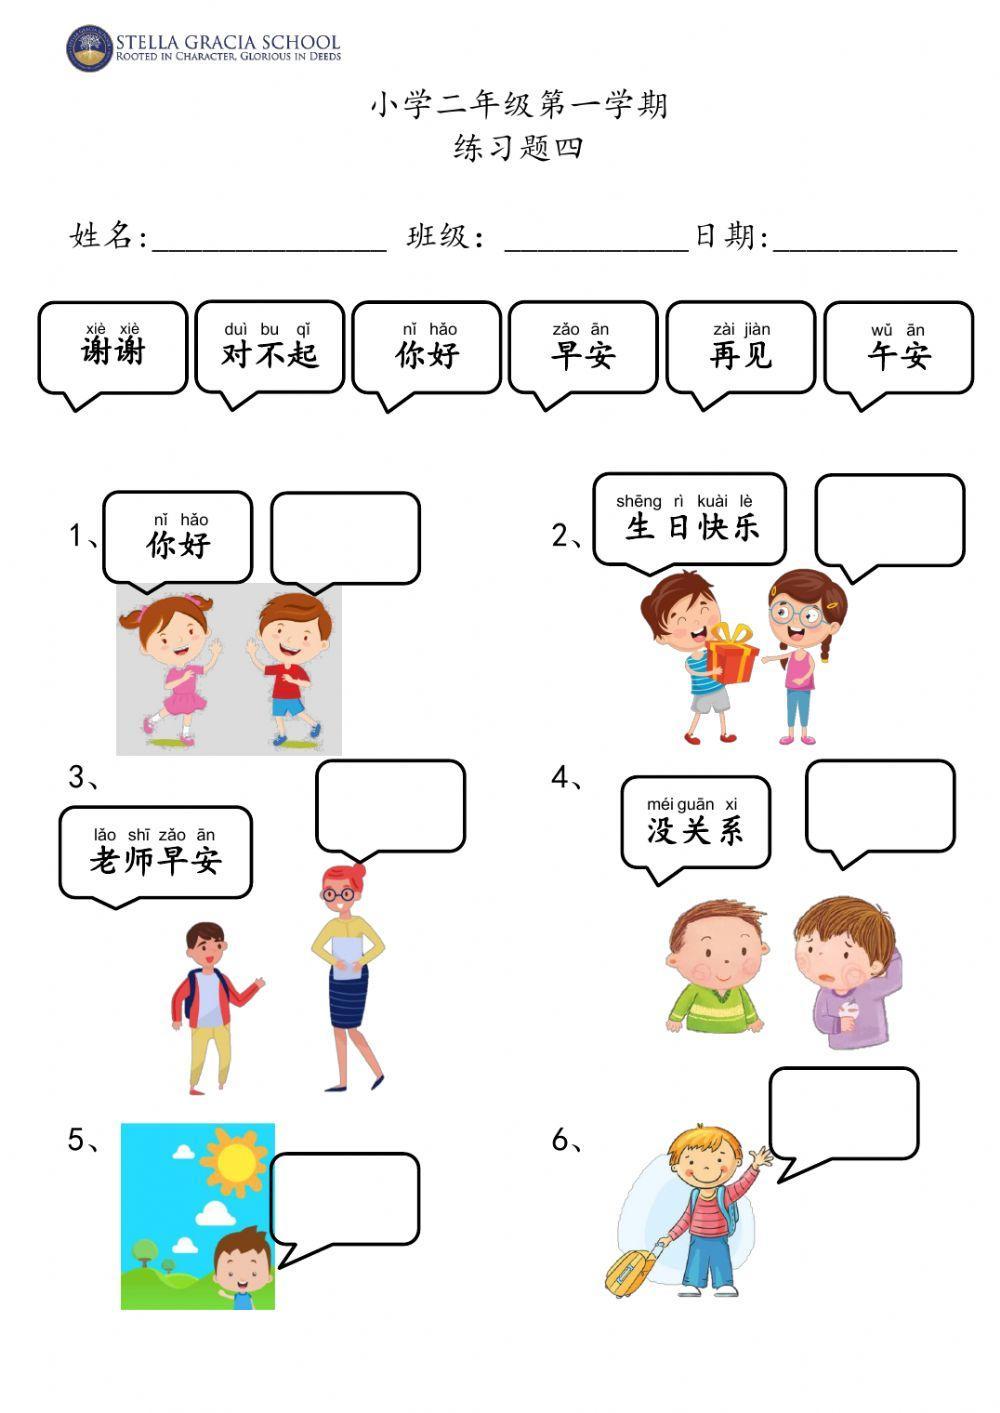 Chinese Greetings exercise